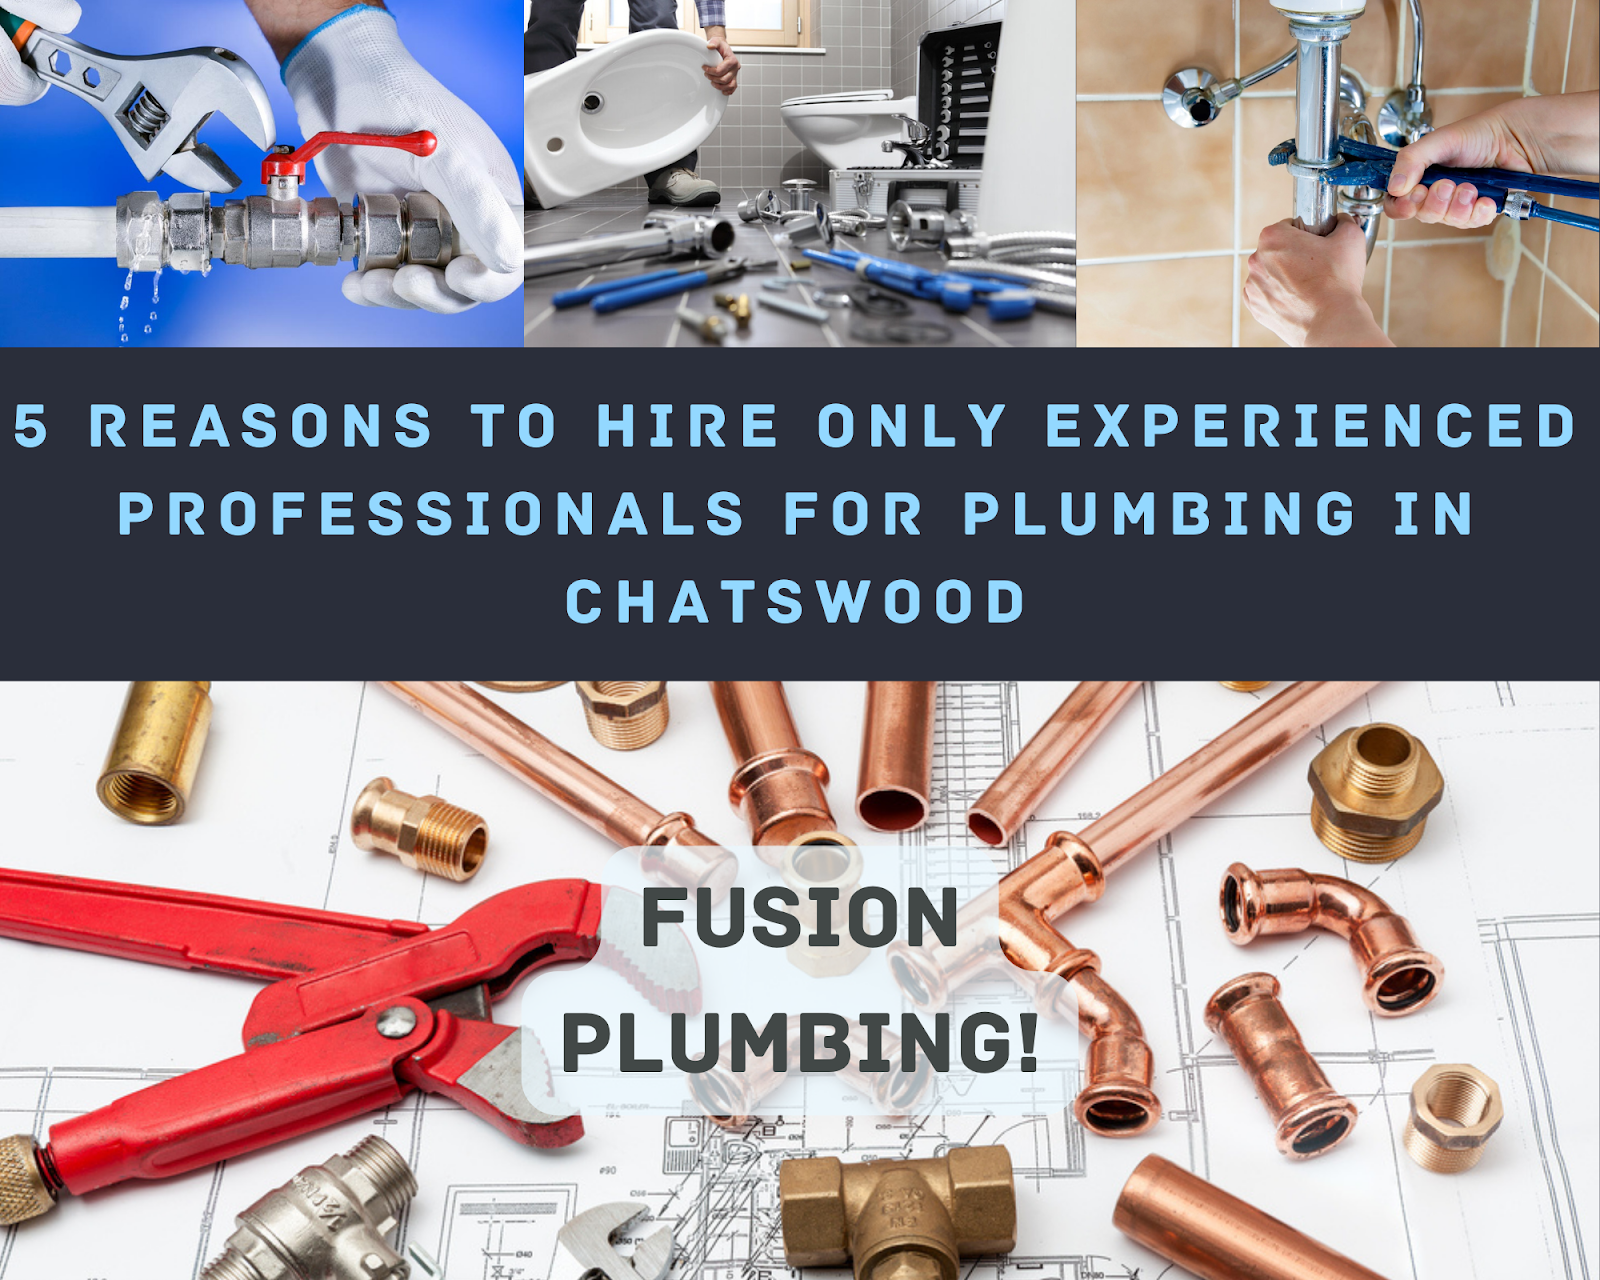 5 Reasons To Hire Only Experienced Professionals For Plumbing In Chatswood